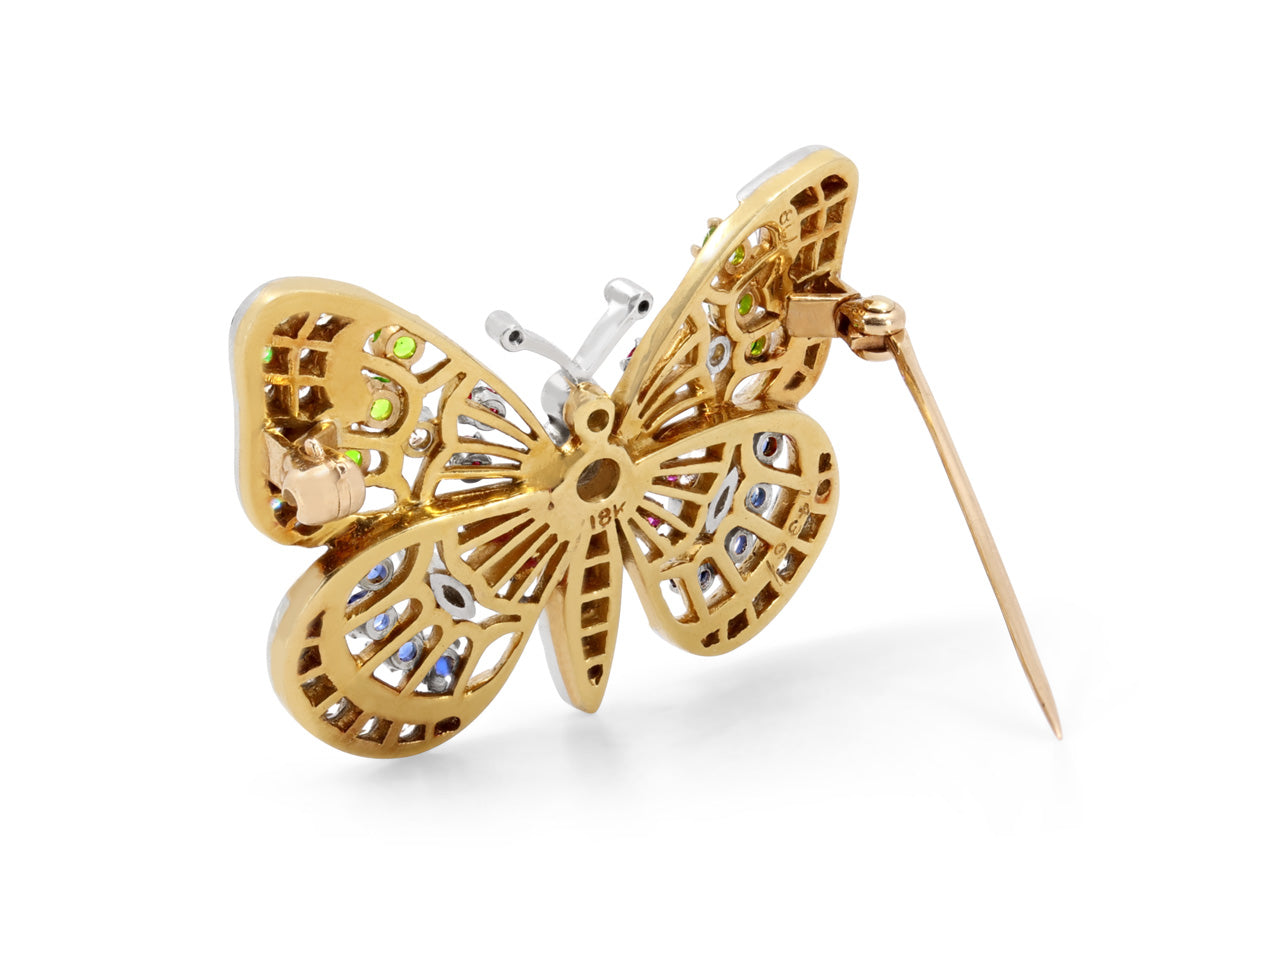 Mid-Century Diamond and Gemstone Butterfly Brooch in 18K and Platinum